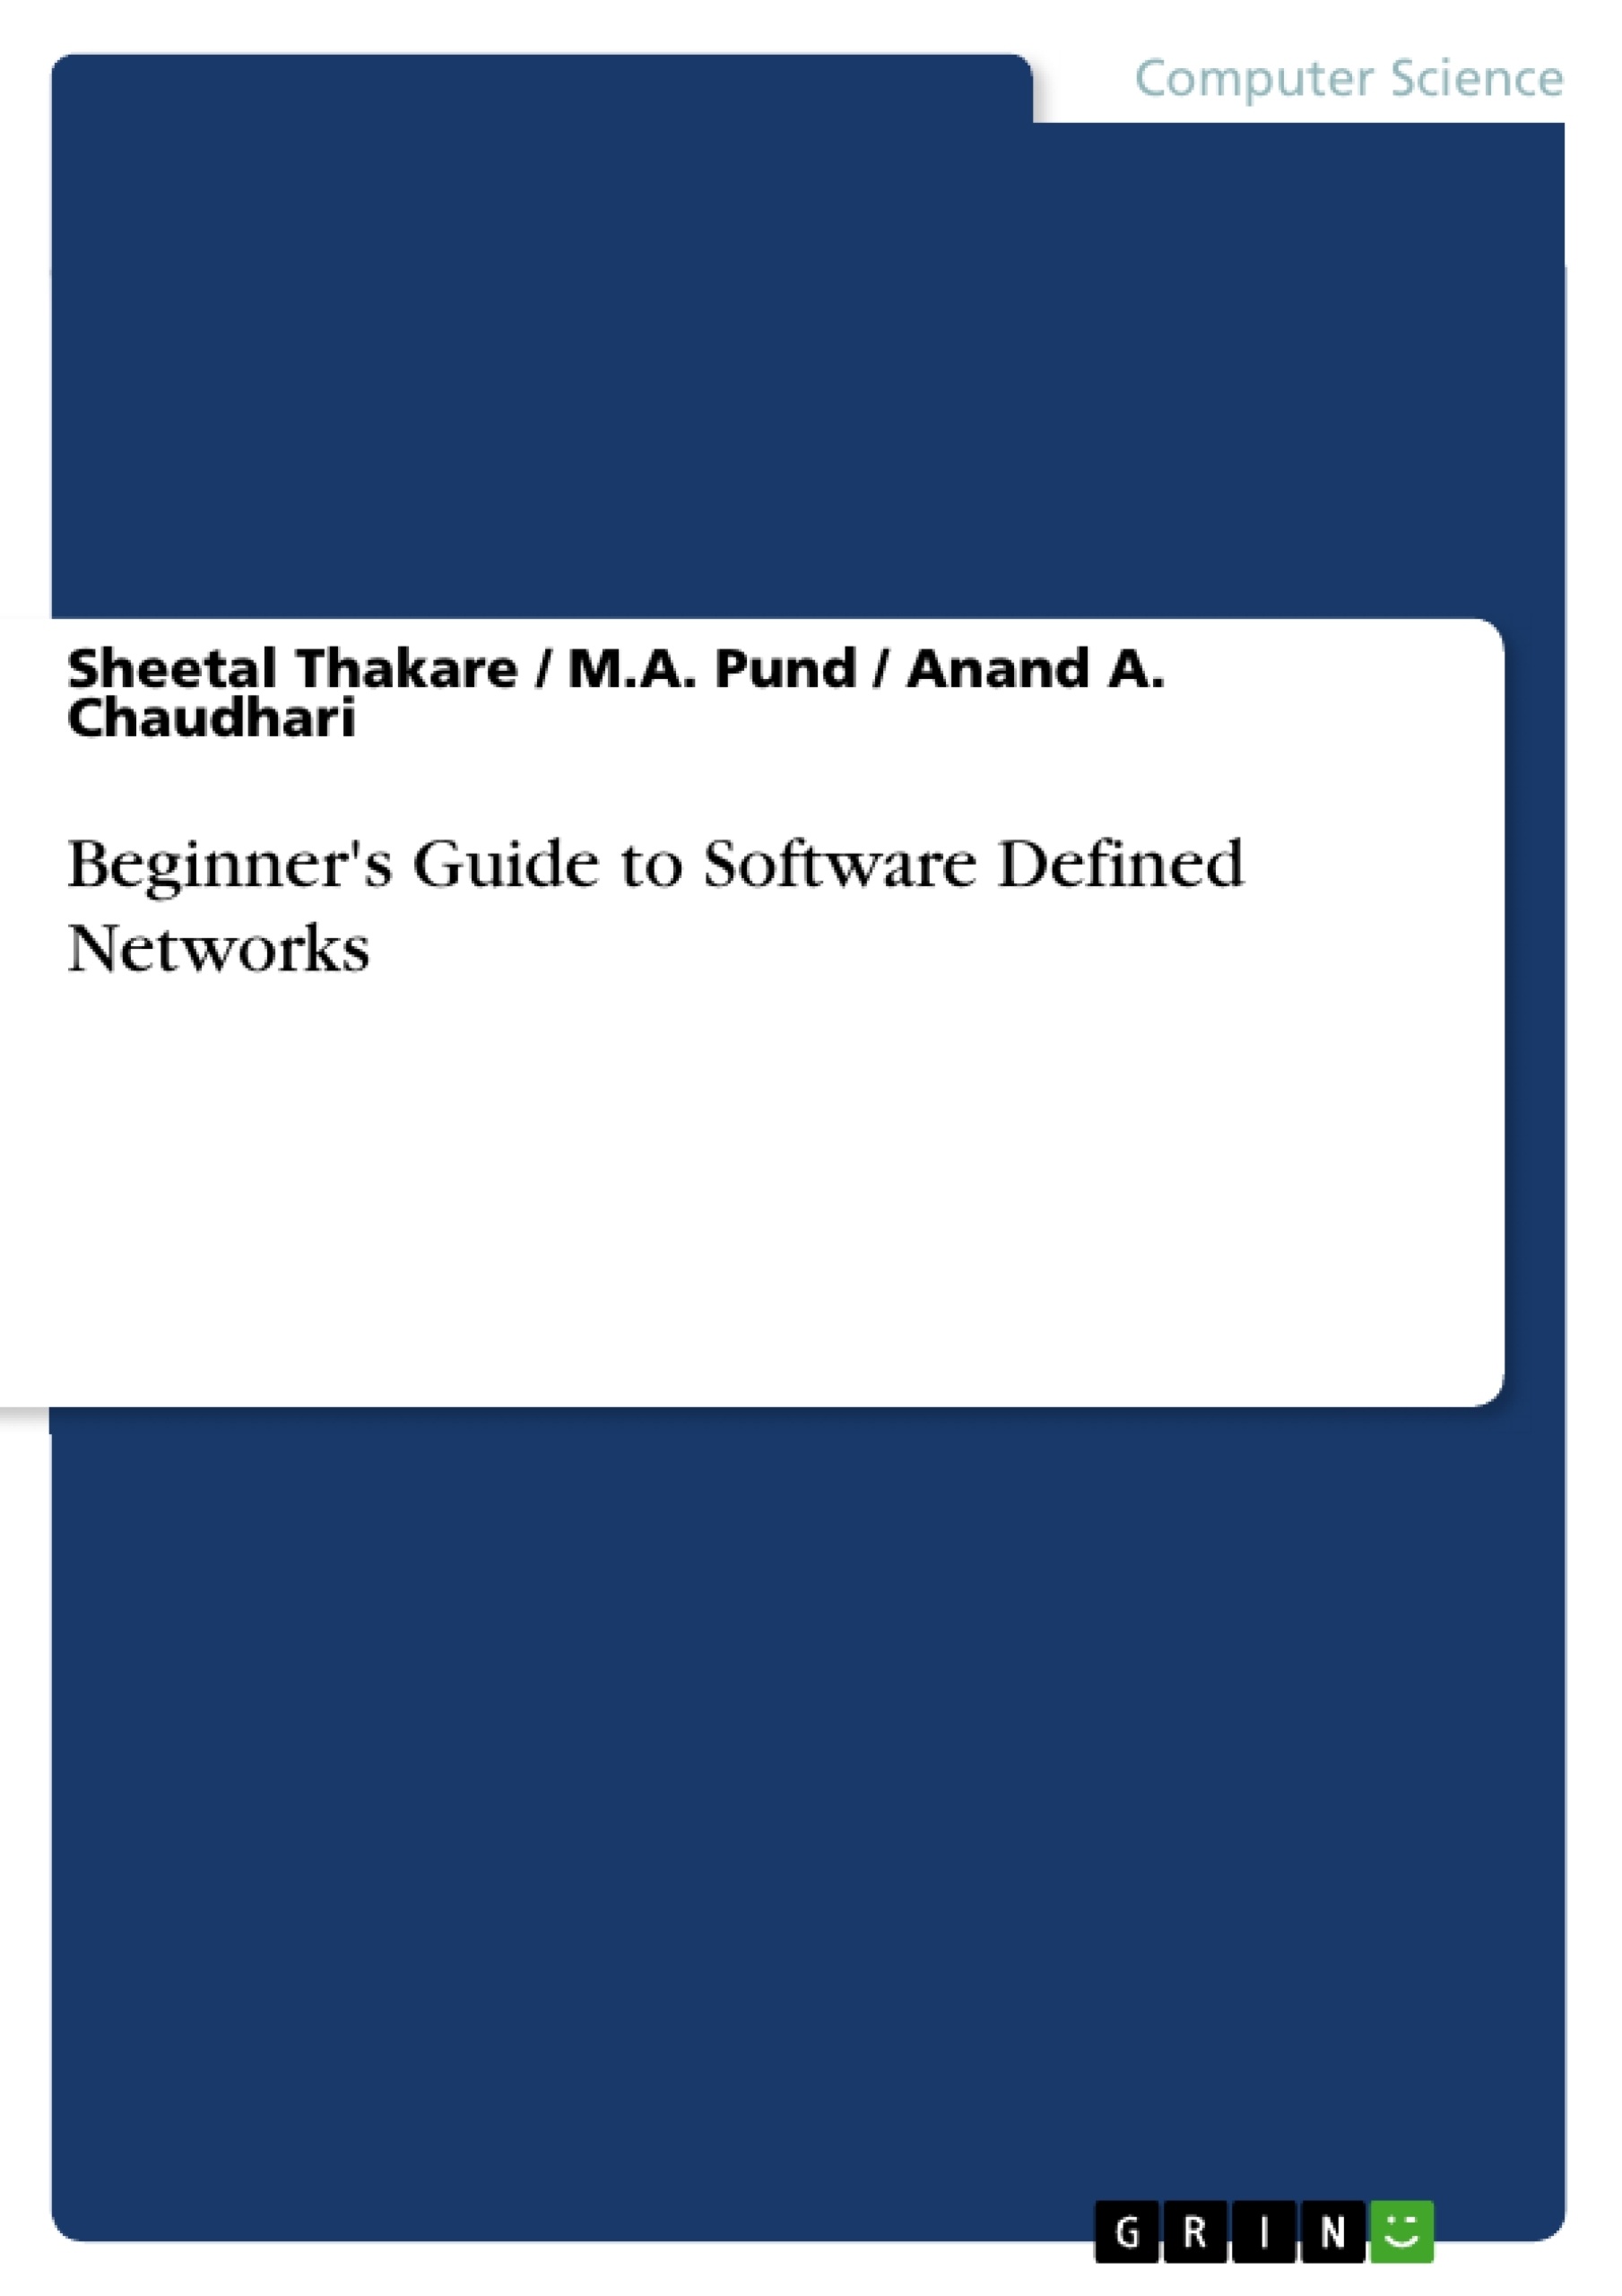 Titel: Beginner's Guide to Software Defined Networks